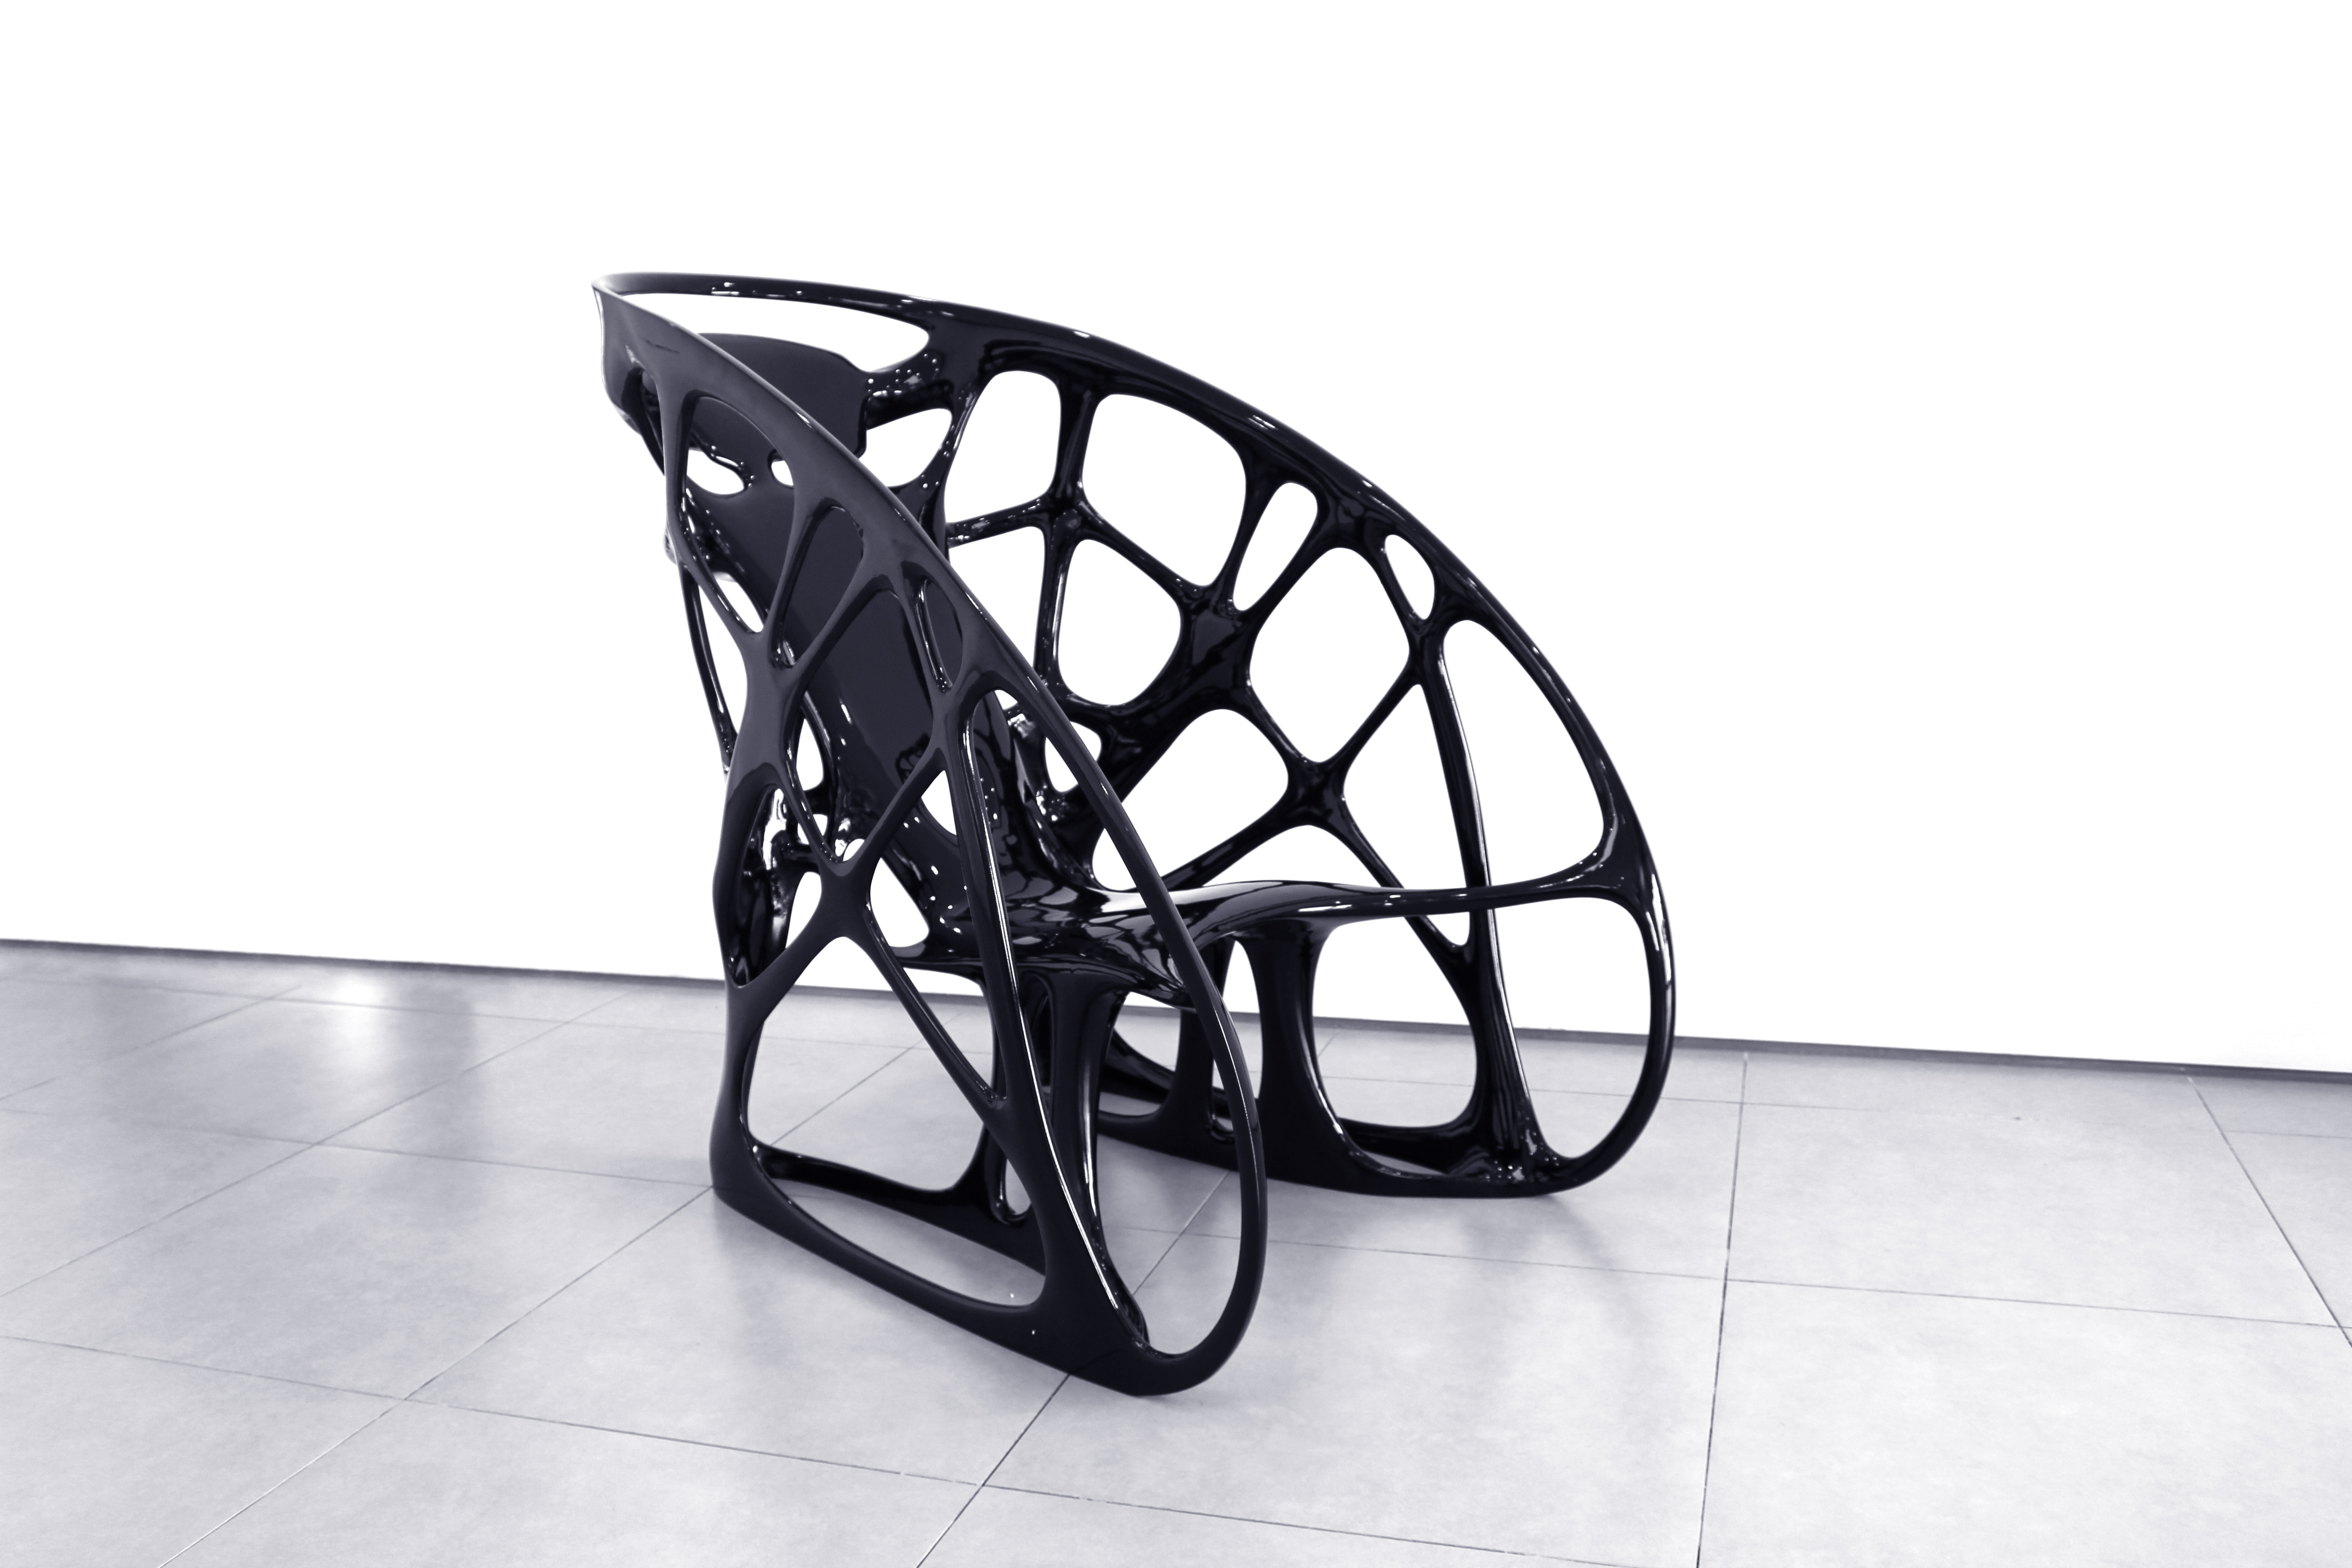 A chair designed and manufactured by Prof Mike Xie’s team using the BESO method and 3D printing technology (credits: Albert Li, Jiaming Ma and Mike Xie)